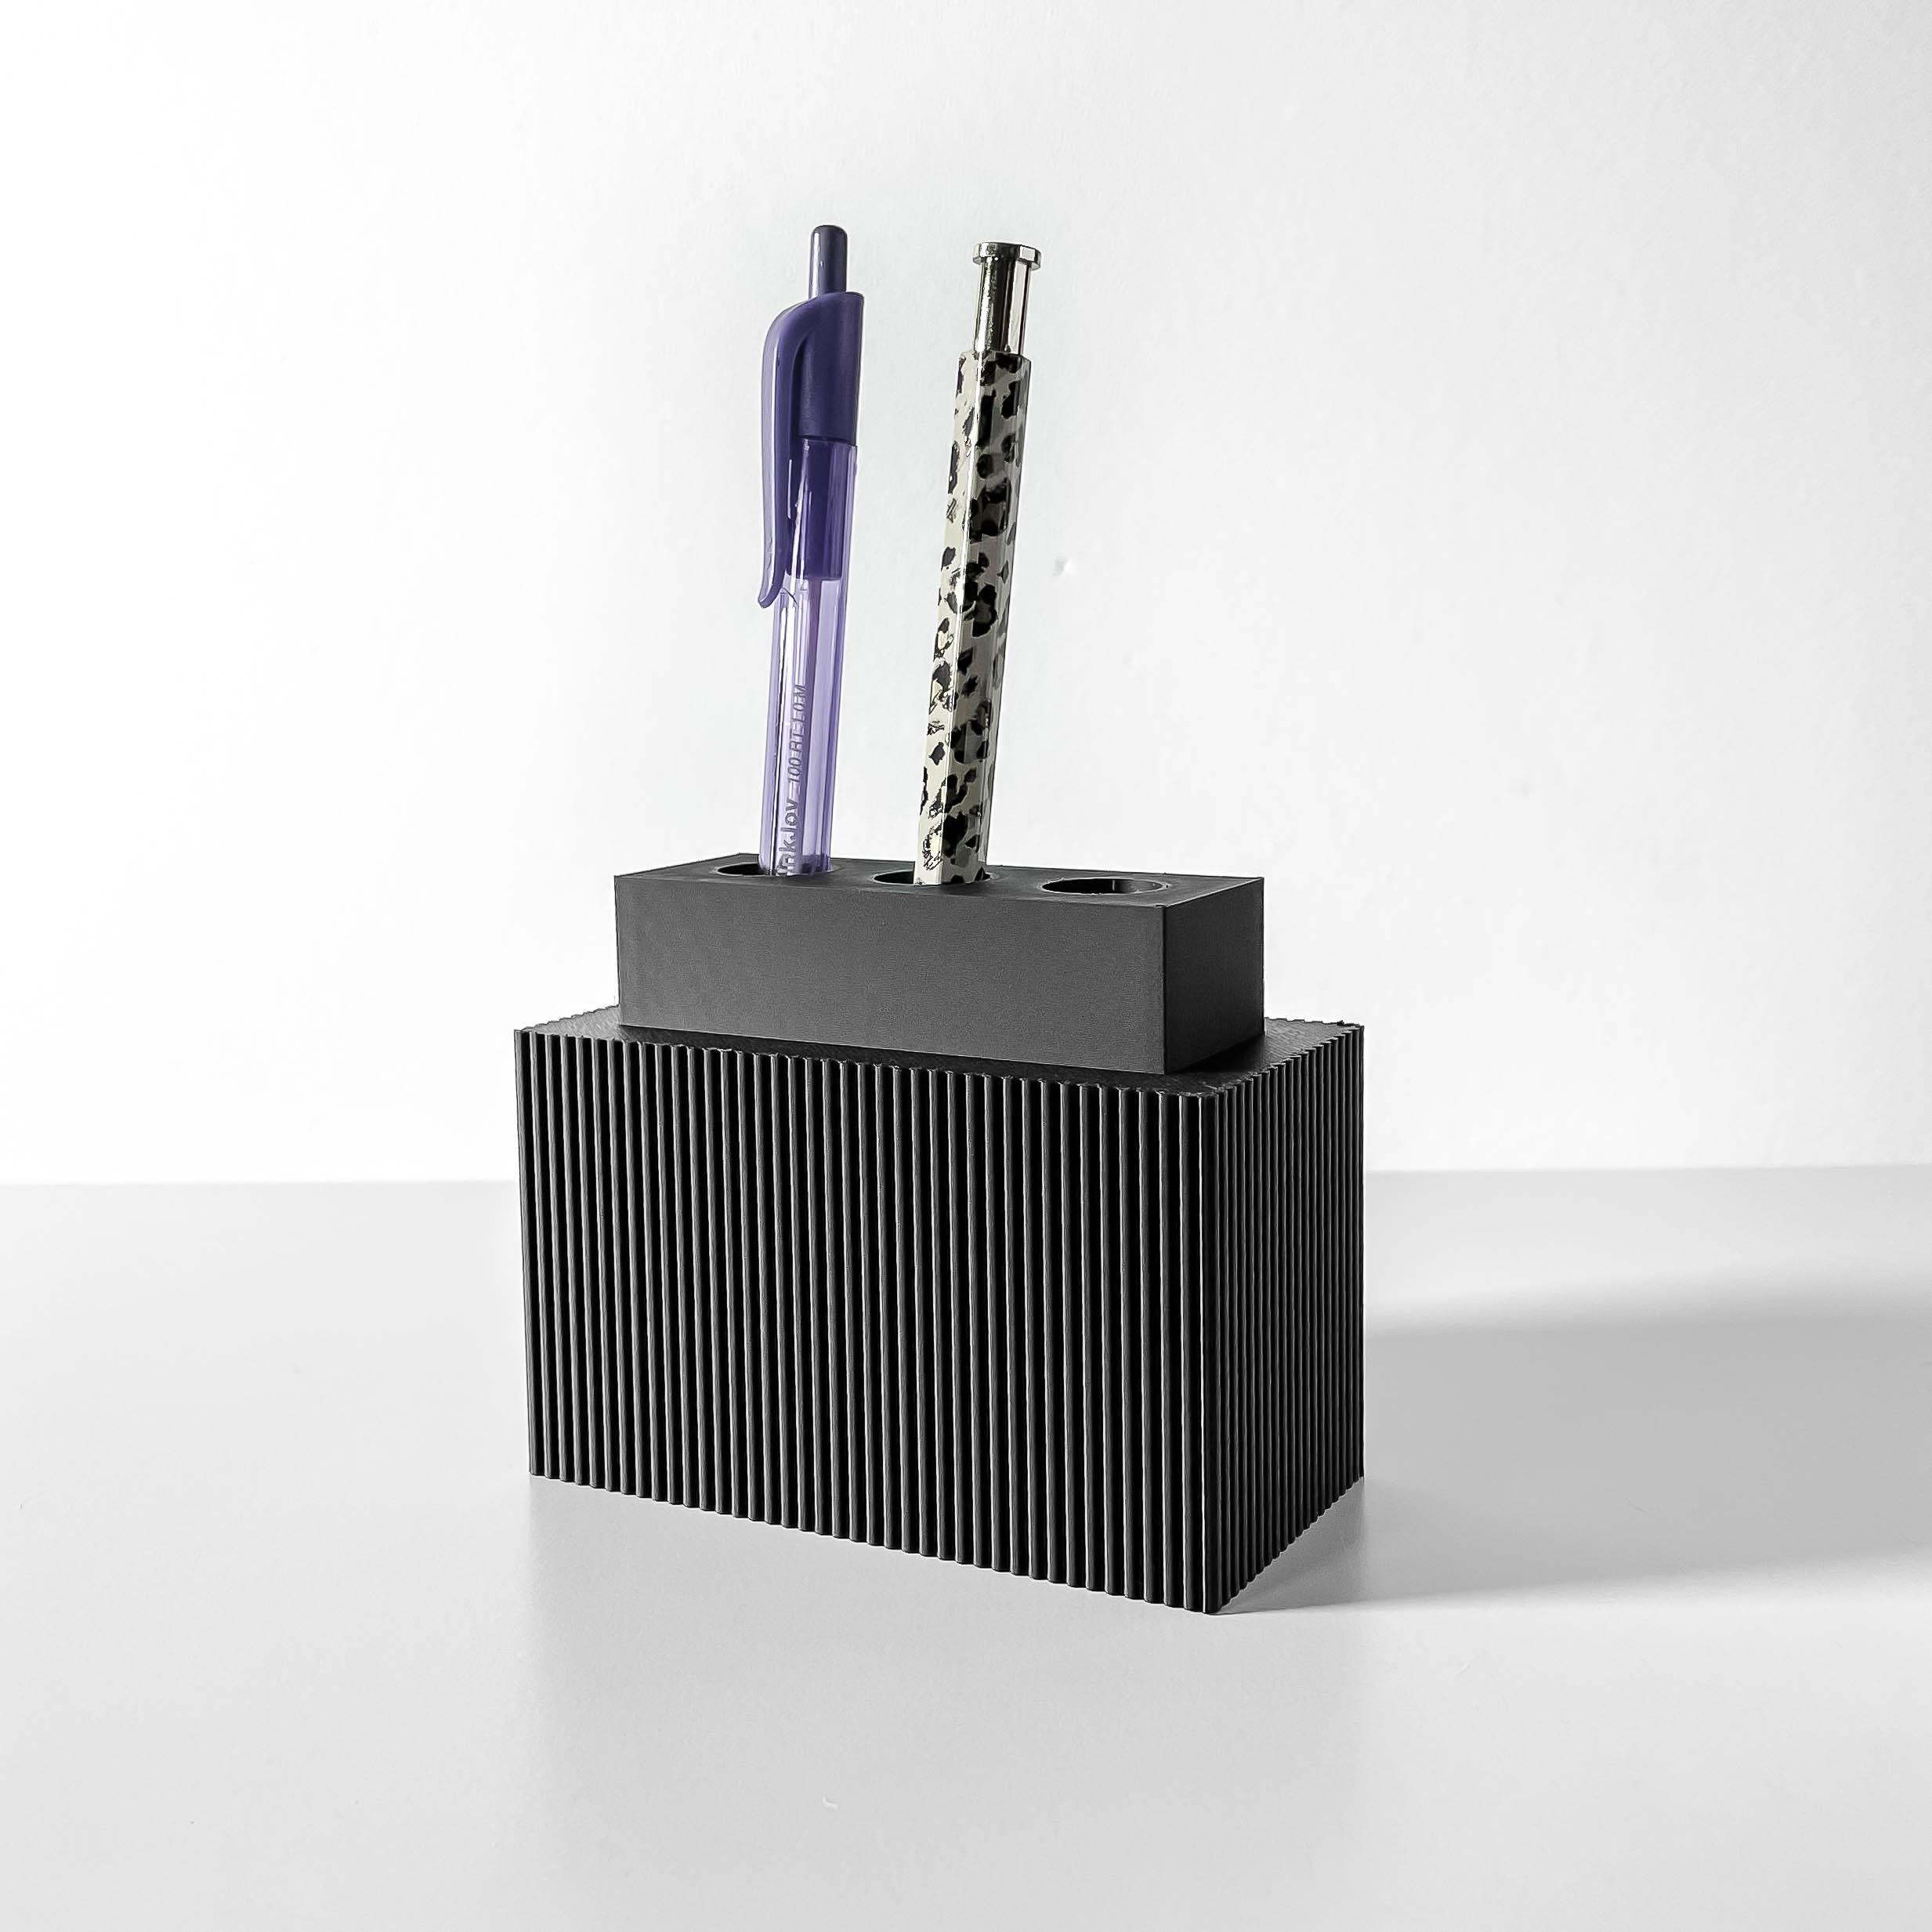 The Osin Pen Holder | Desk Organizer and Pencil Cup Holder | Modern Office and Home Decor 3d model